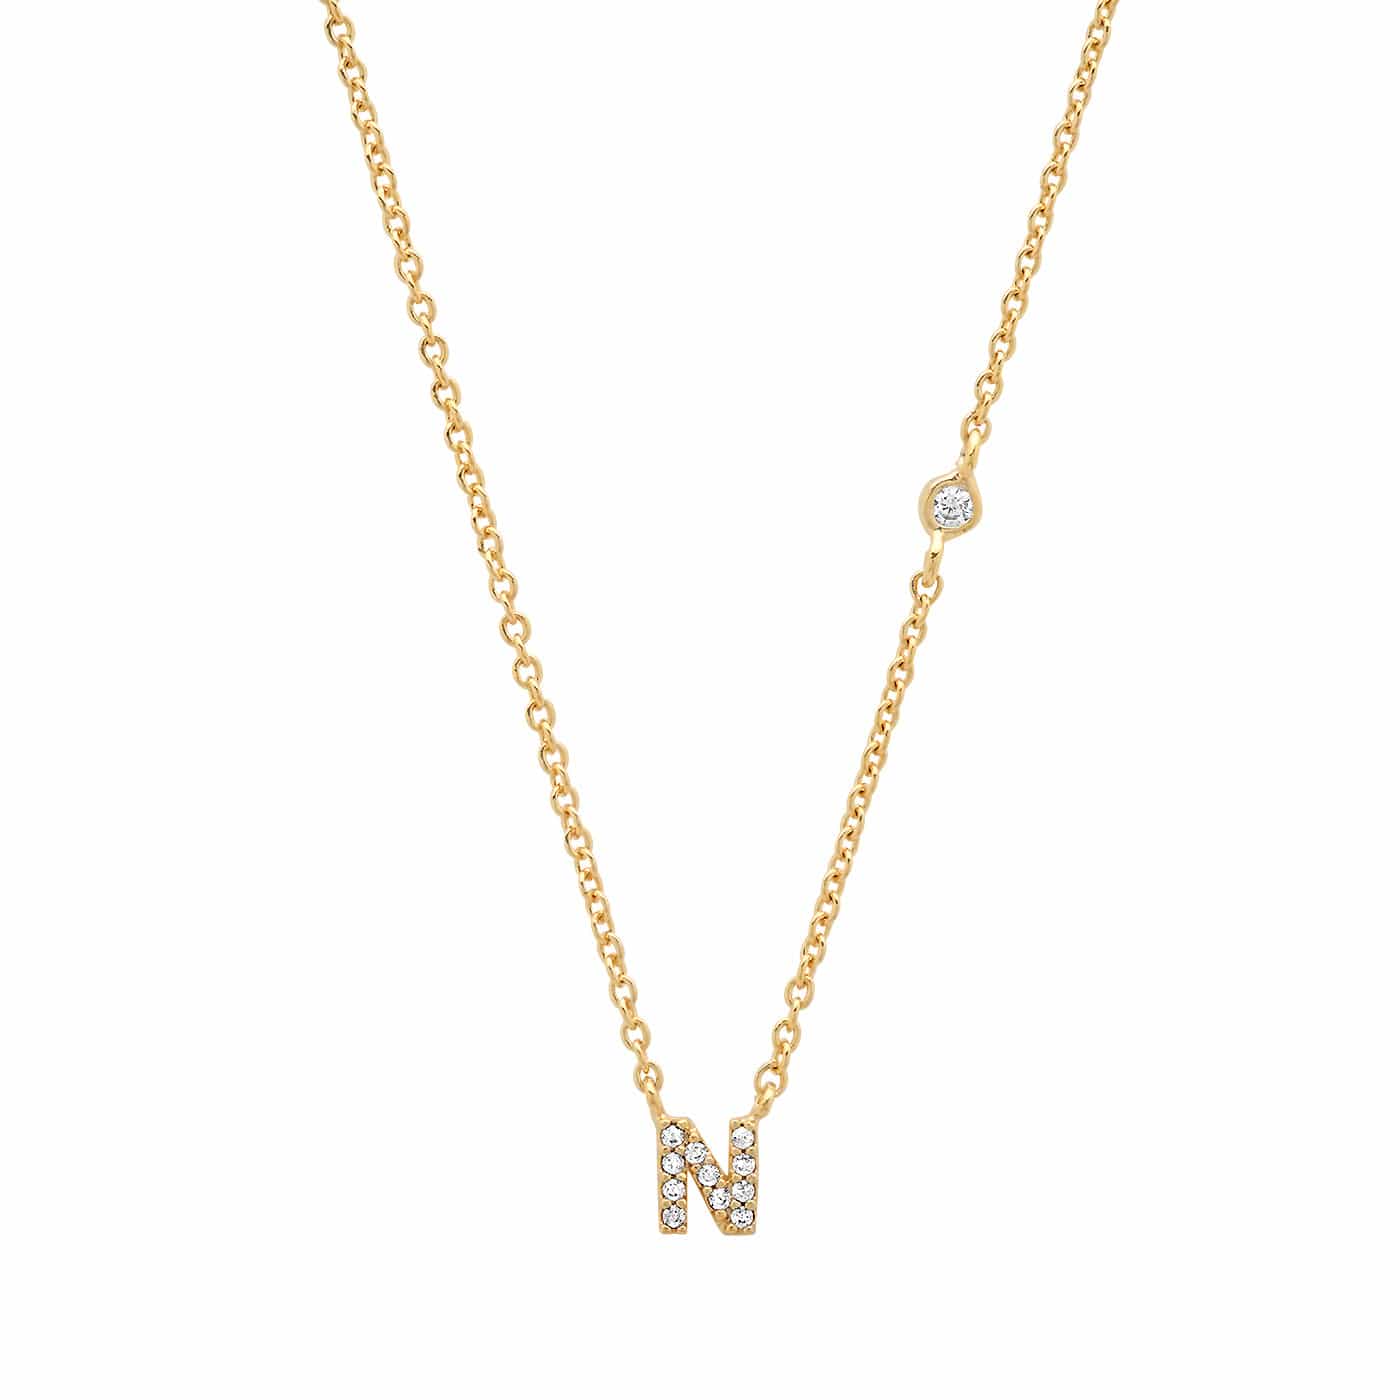 TAI JEWELRY Necklace Gold / N CZ Initial Necklace